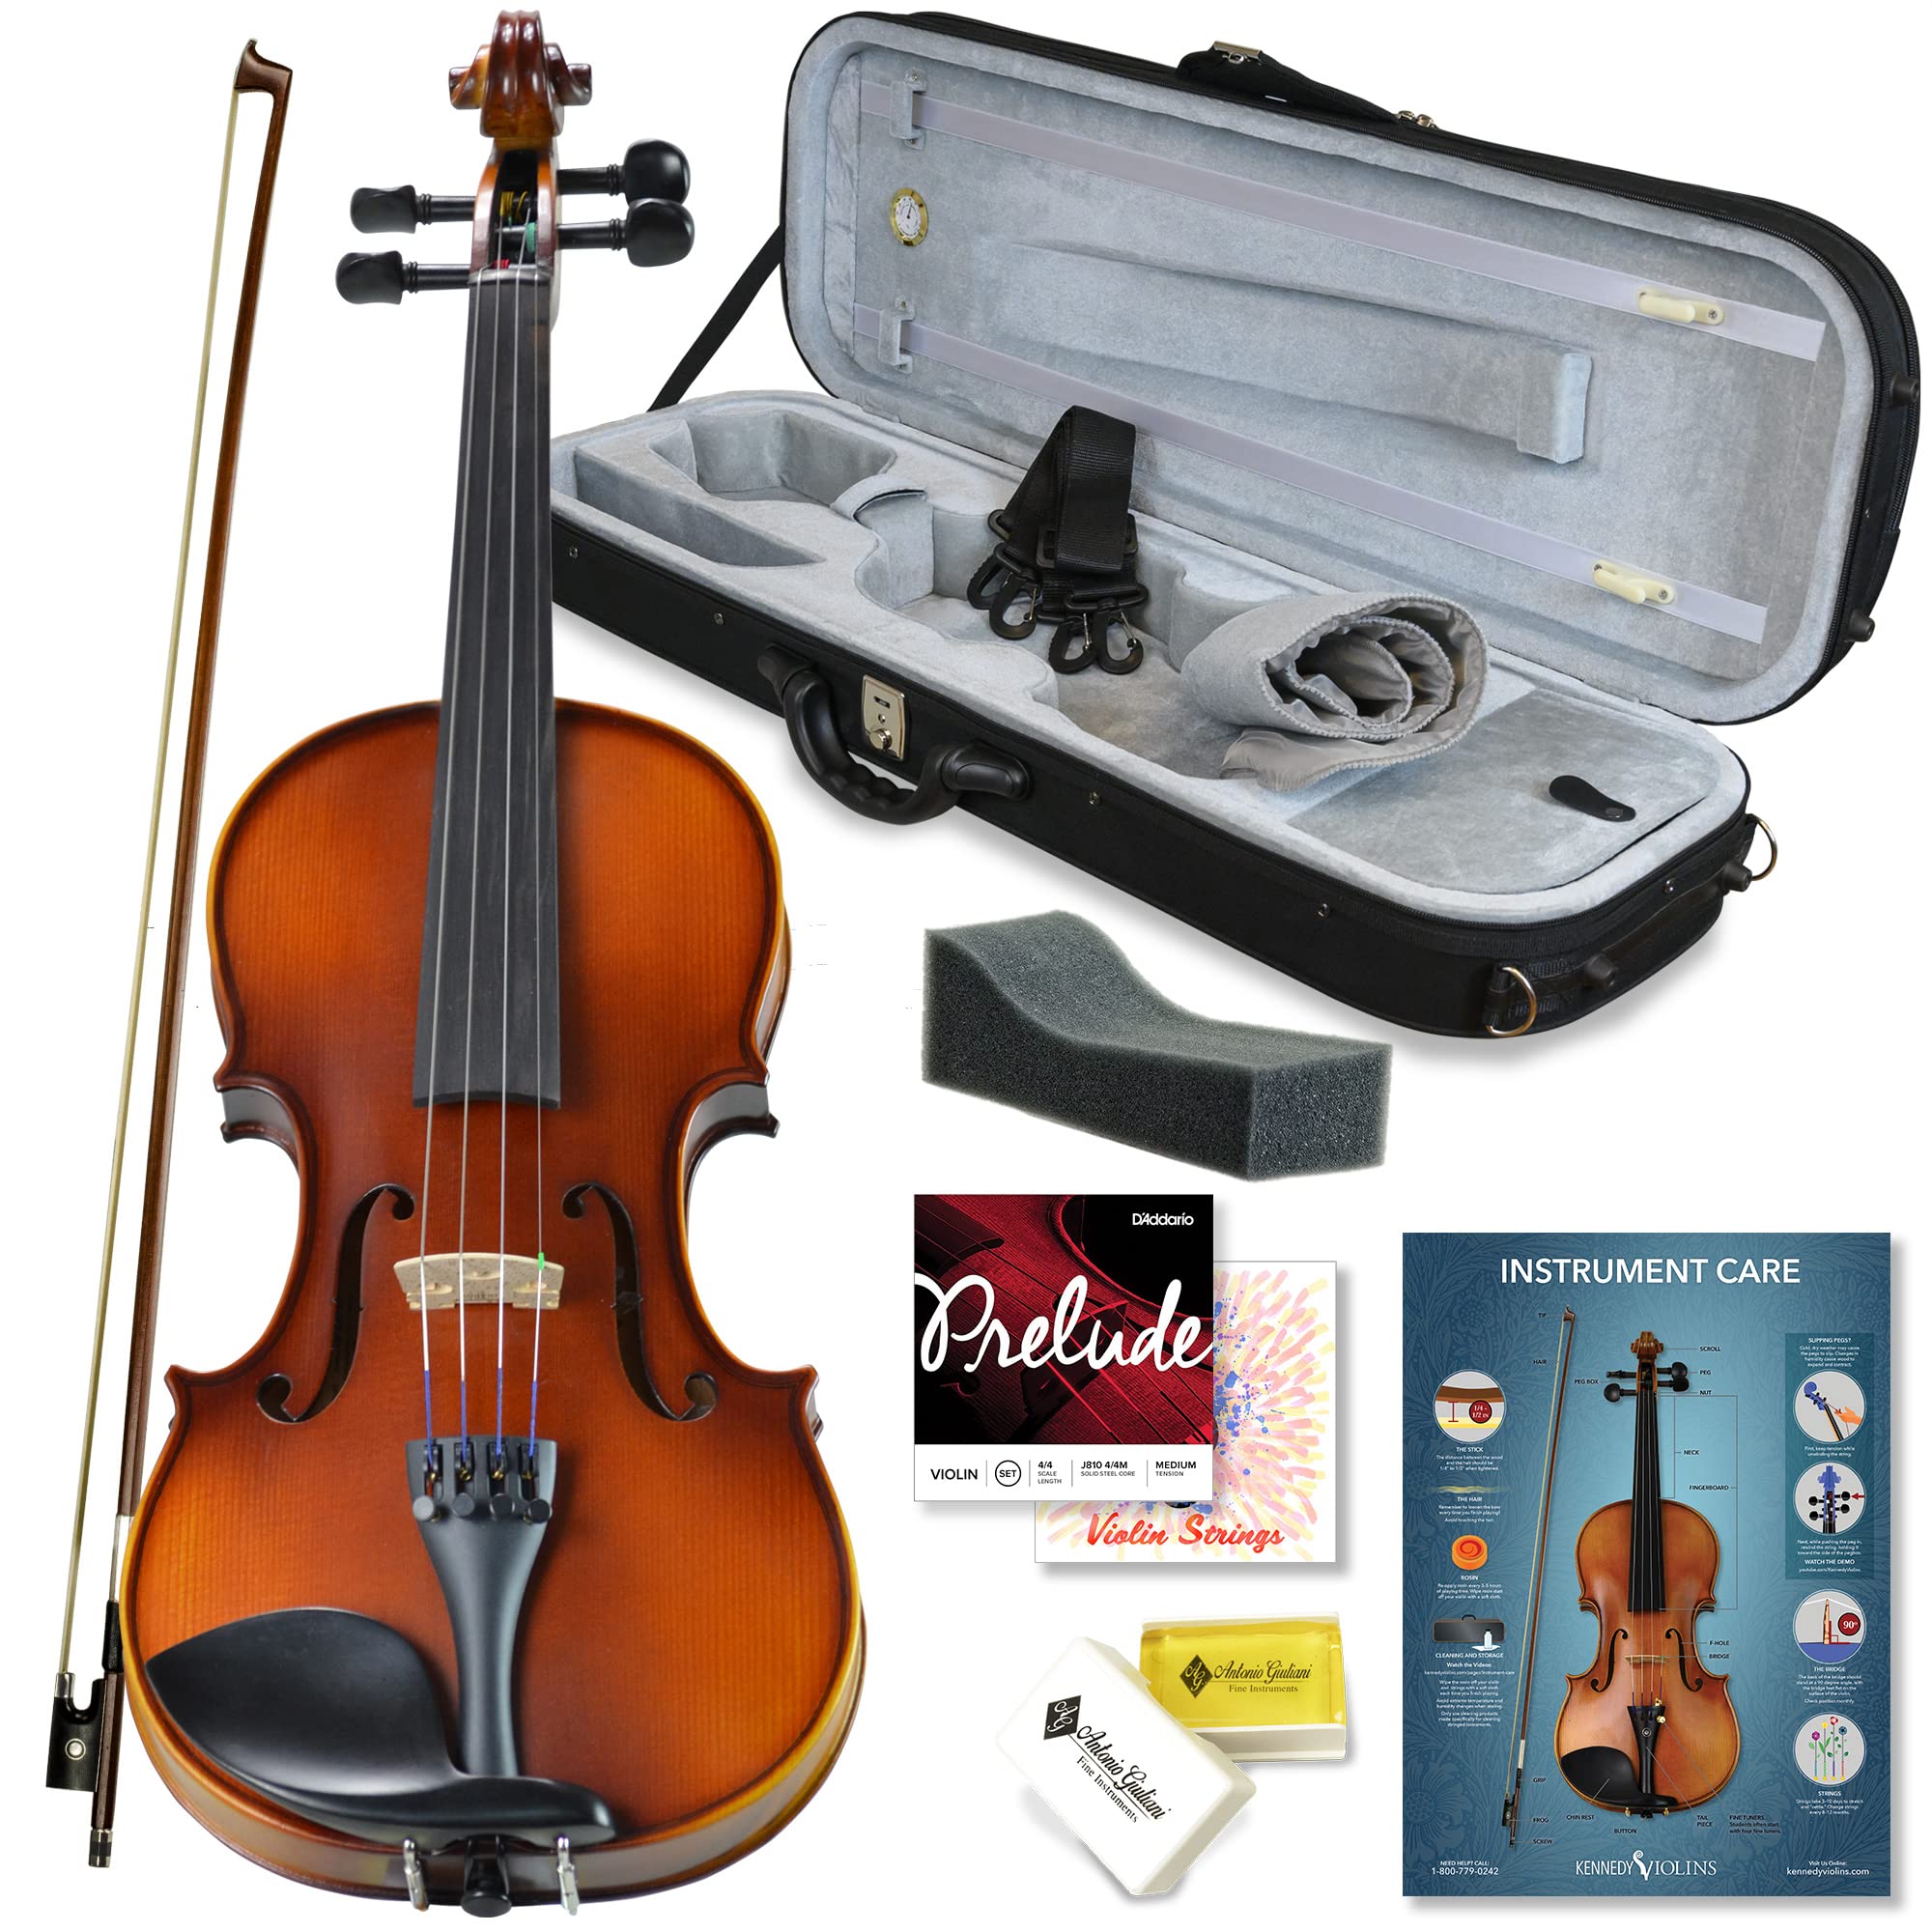 Kennedy Violins Bunnel Pupil Violin Outfit 18 Size Clearance By Kennedy Violins - Carrying Case And Accessories Included - Solid Maple Wood And